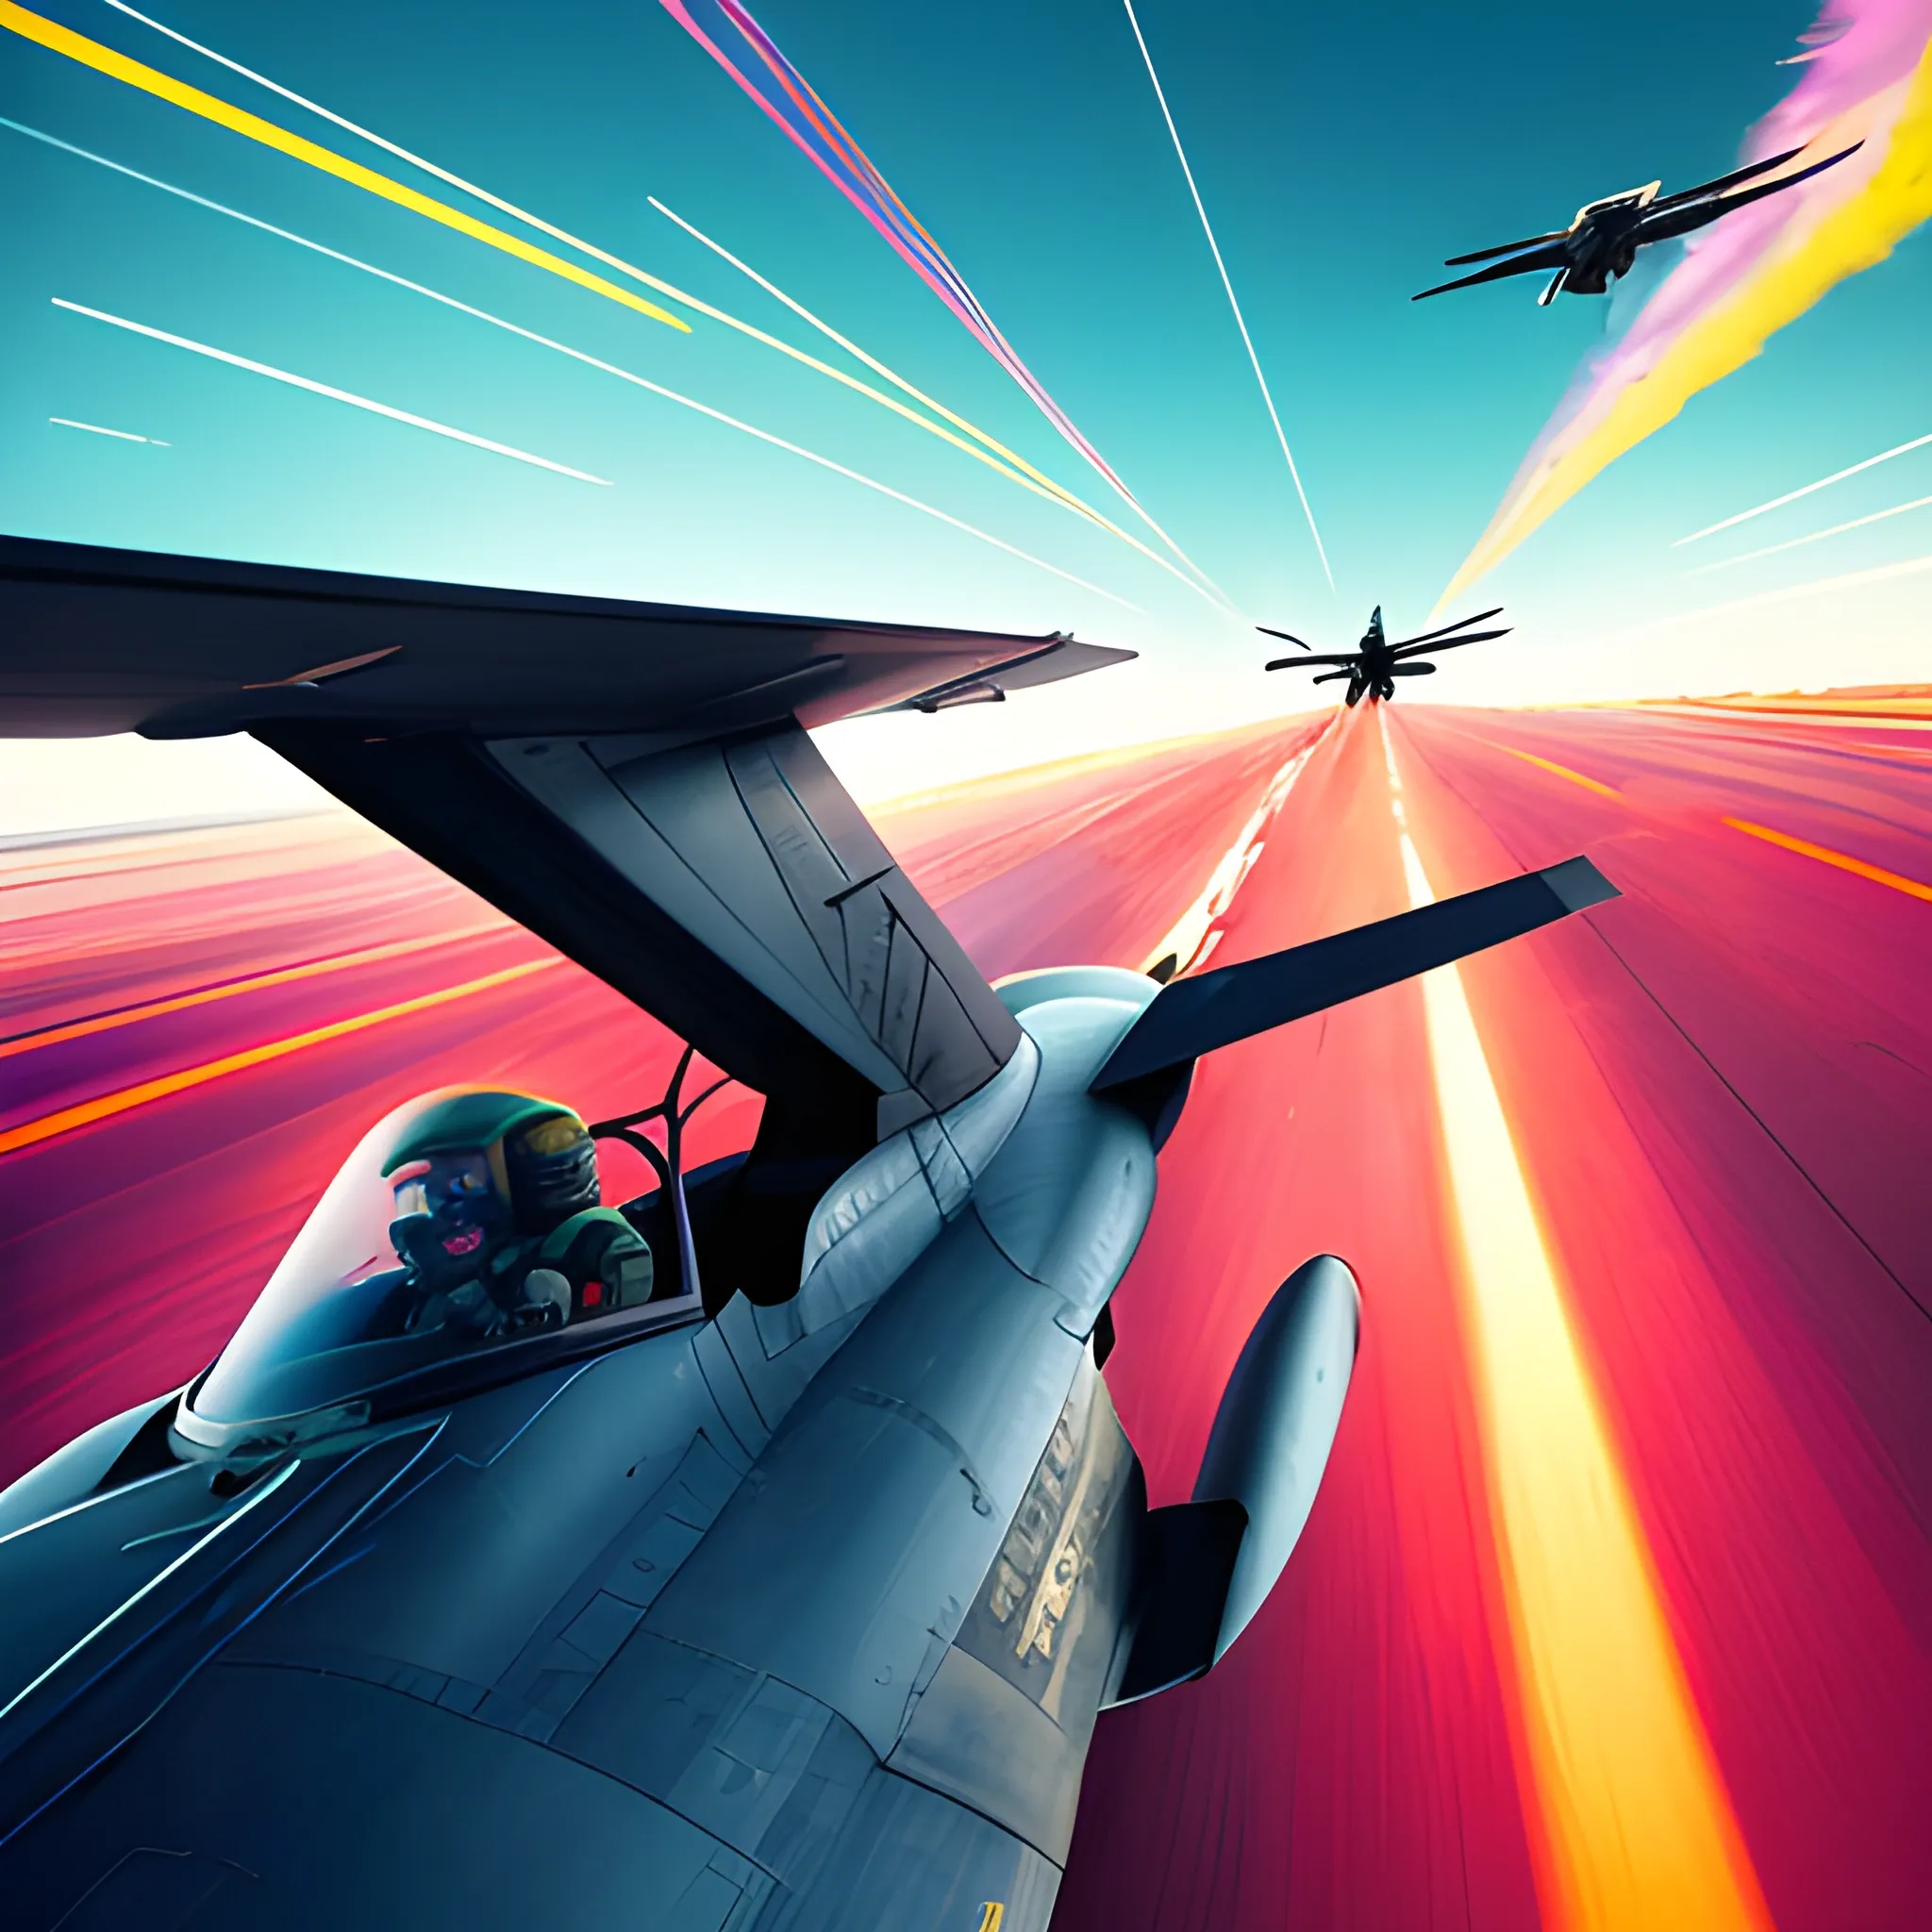 A busy Highway on the ground with advanced Fighter planes soaring overhead, sleek and powerful, leaving trails of exhaust in the sky. Dynamic aerial maneuvers, intense dogfights, adrenaline-filled action.Digital illustration, bold color palette, strong contrasts, meticulous attention to detail. Tom Cruise, Top Gun movie poster, 80s retro aesthetic, vaporware, propaganda art. High-resolution digital camera, vibrant saturation, wide-angle lens, over the shoulder point of view.